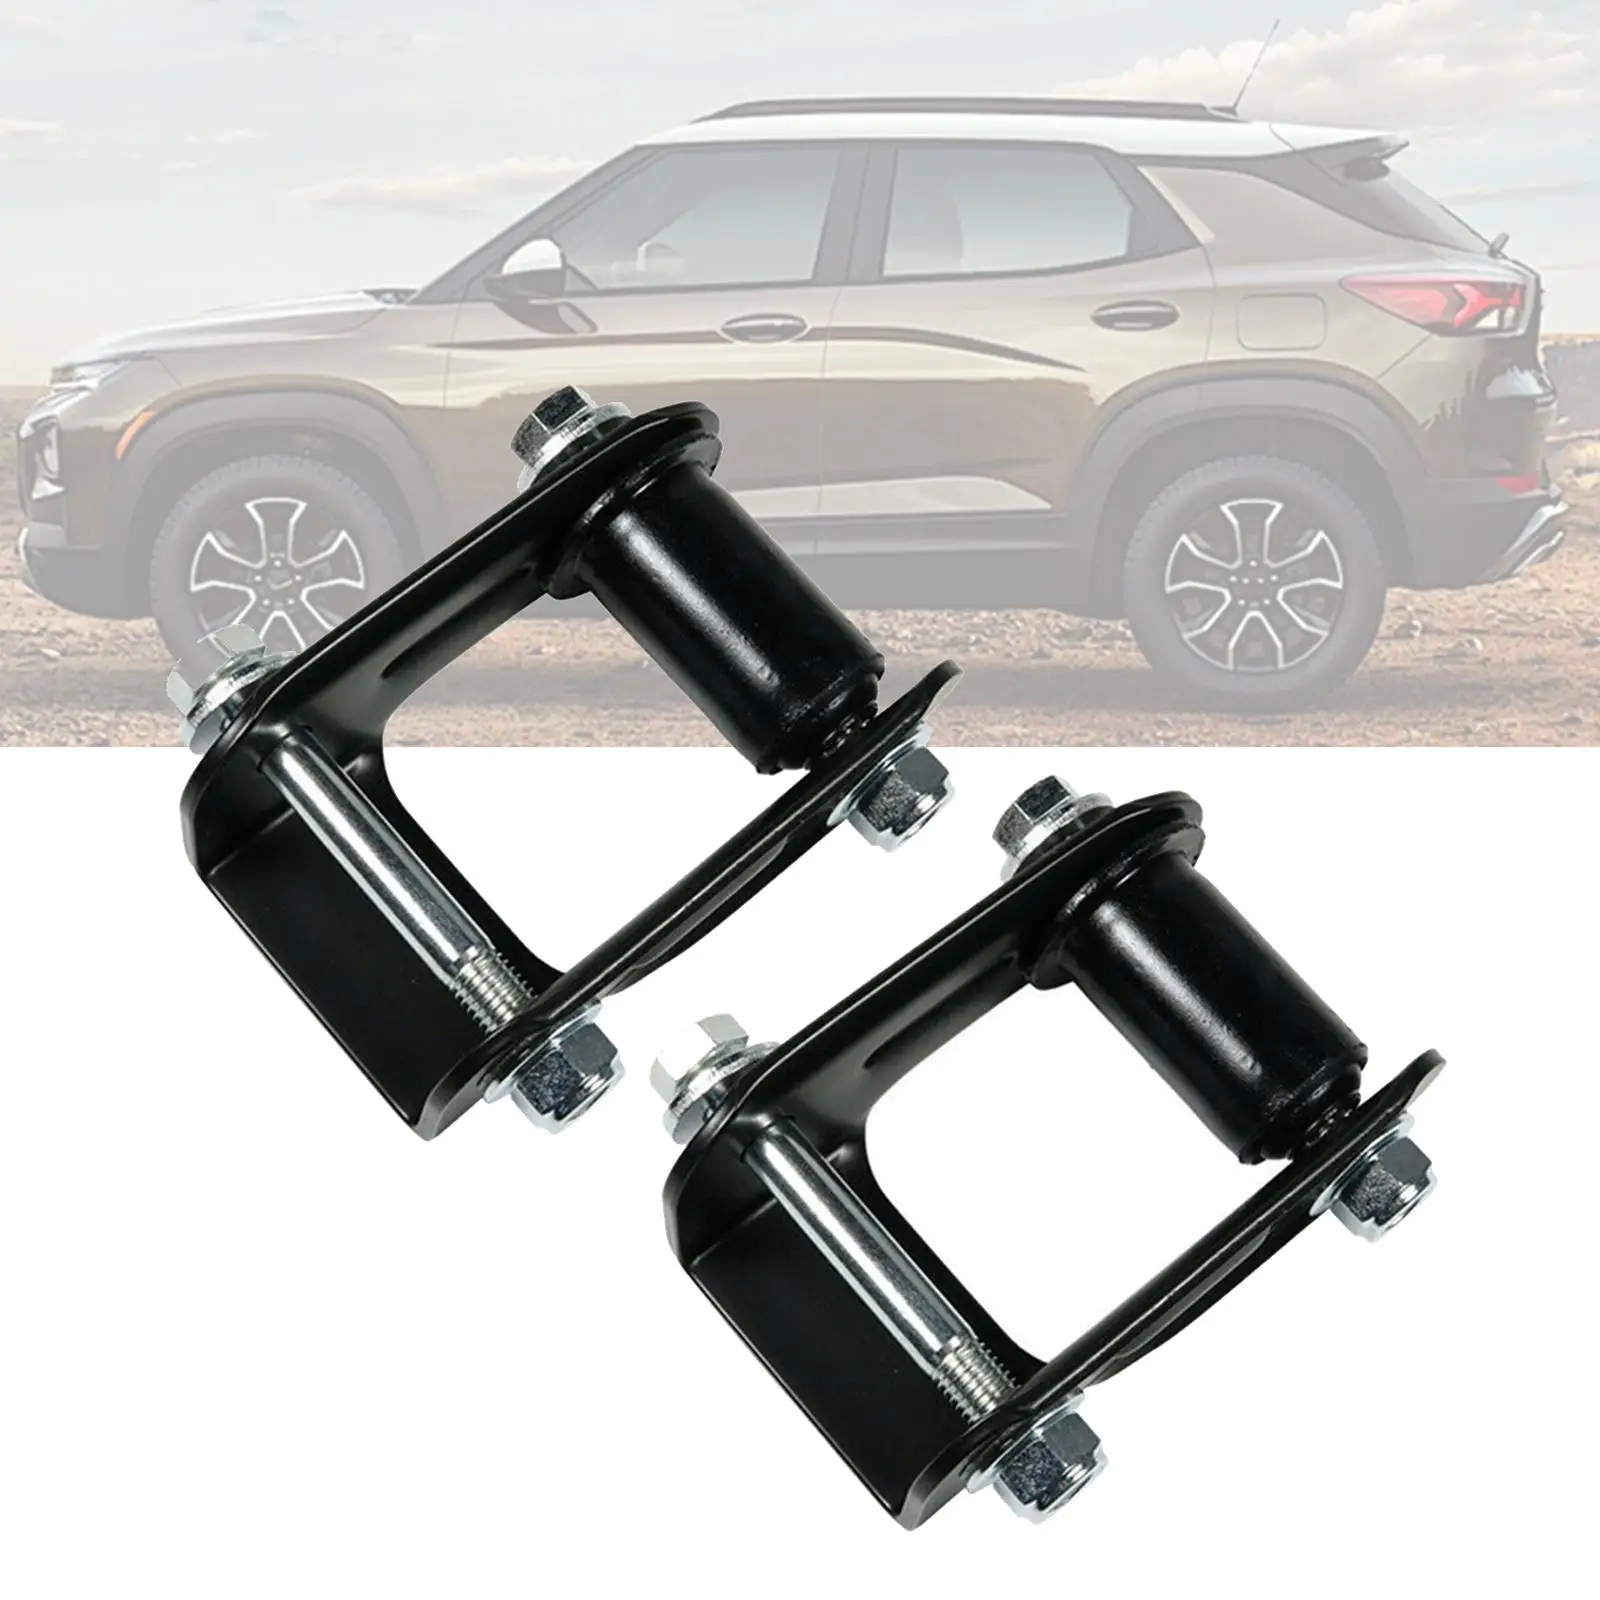 2Pcs Leaf Spring Shackle Kit Easy to Mount Spare Parts Modification replacement Chevrolet S10 Pickup S10 Blazer Blazer